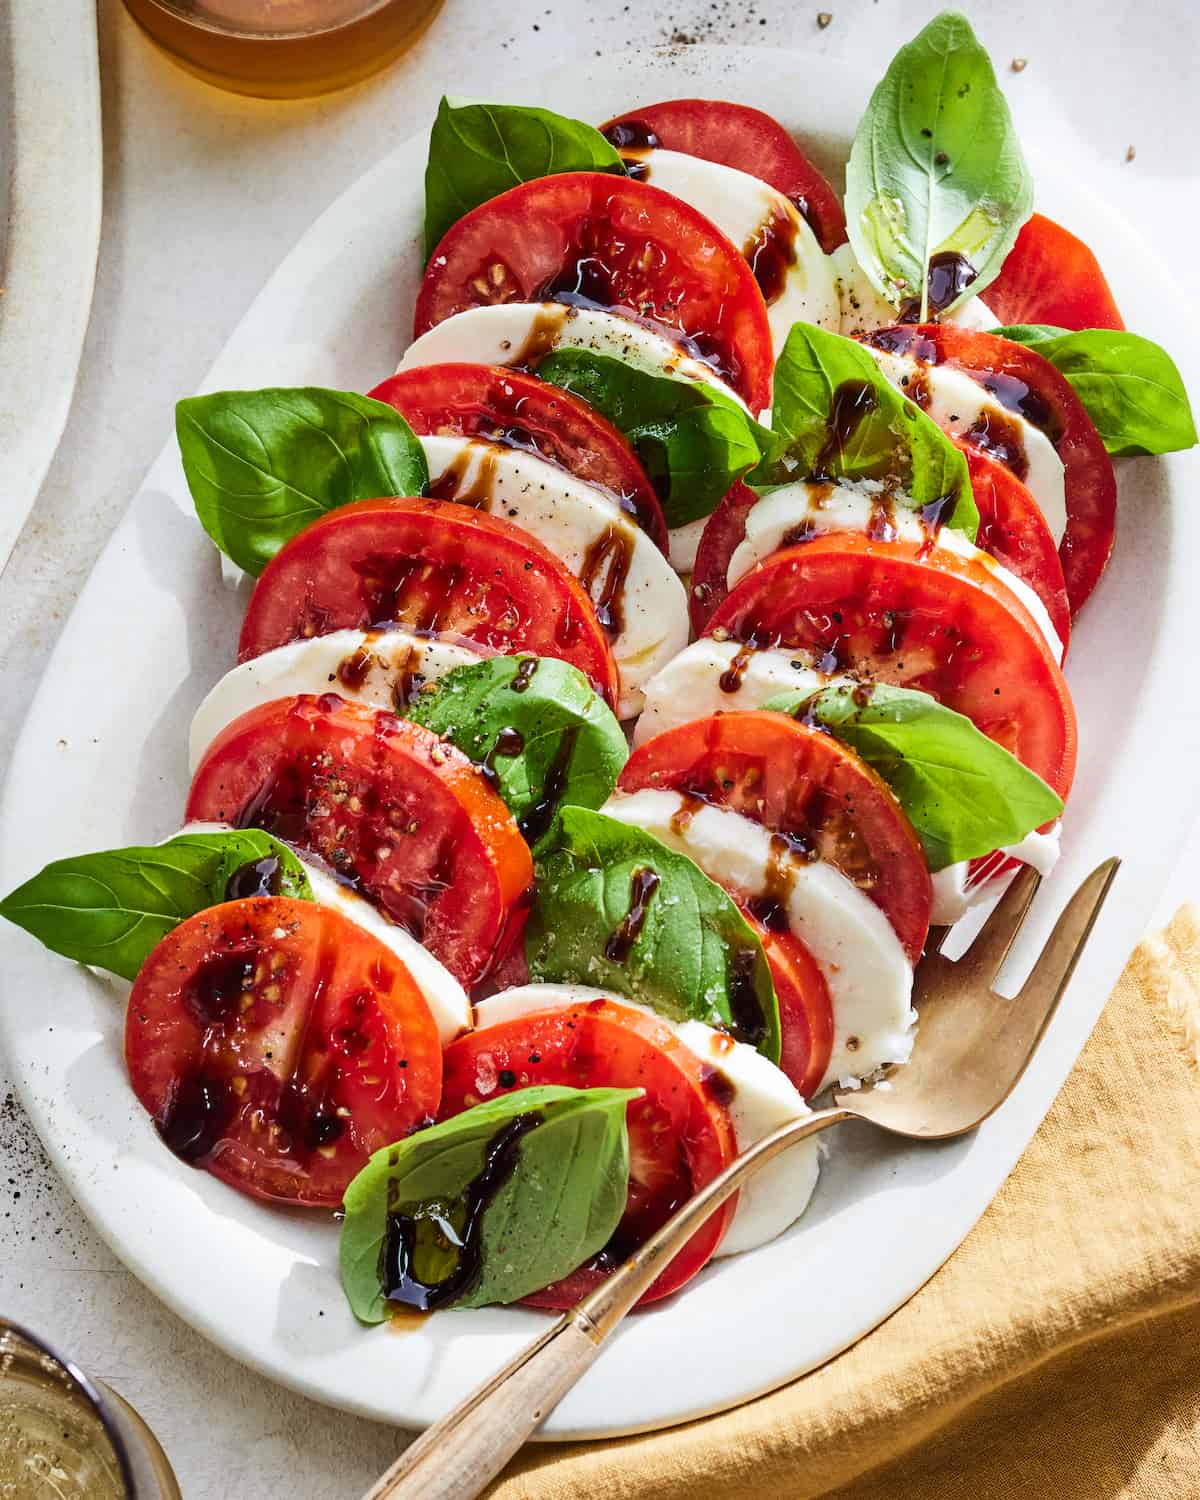 Sliced tomatoes, sliced mozzarella, and basil leaves drizzled with a balsamic glaze.